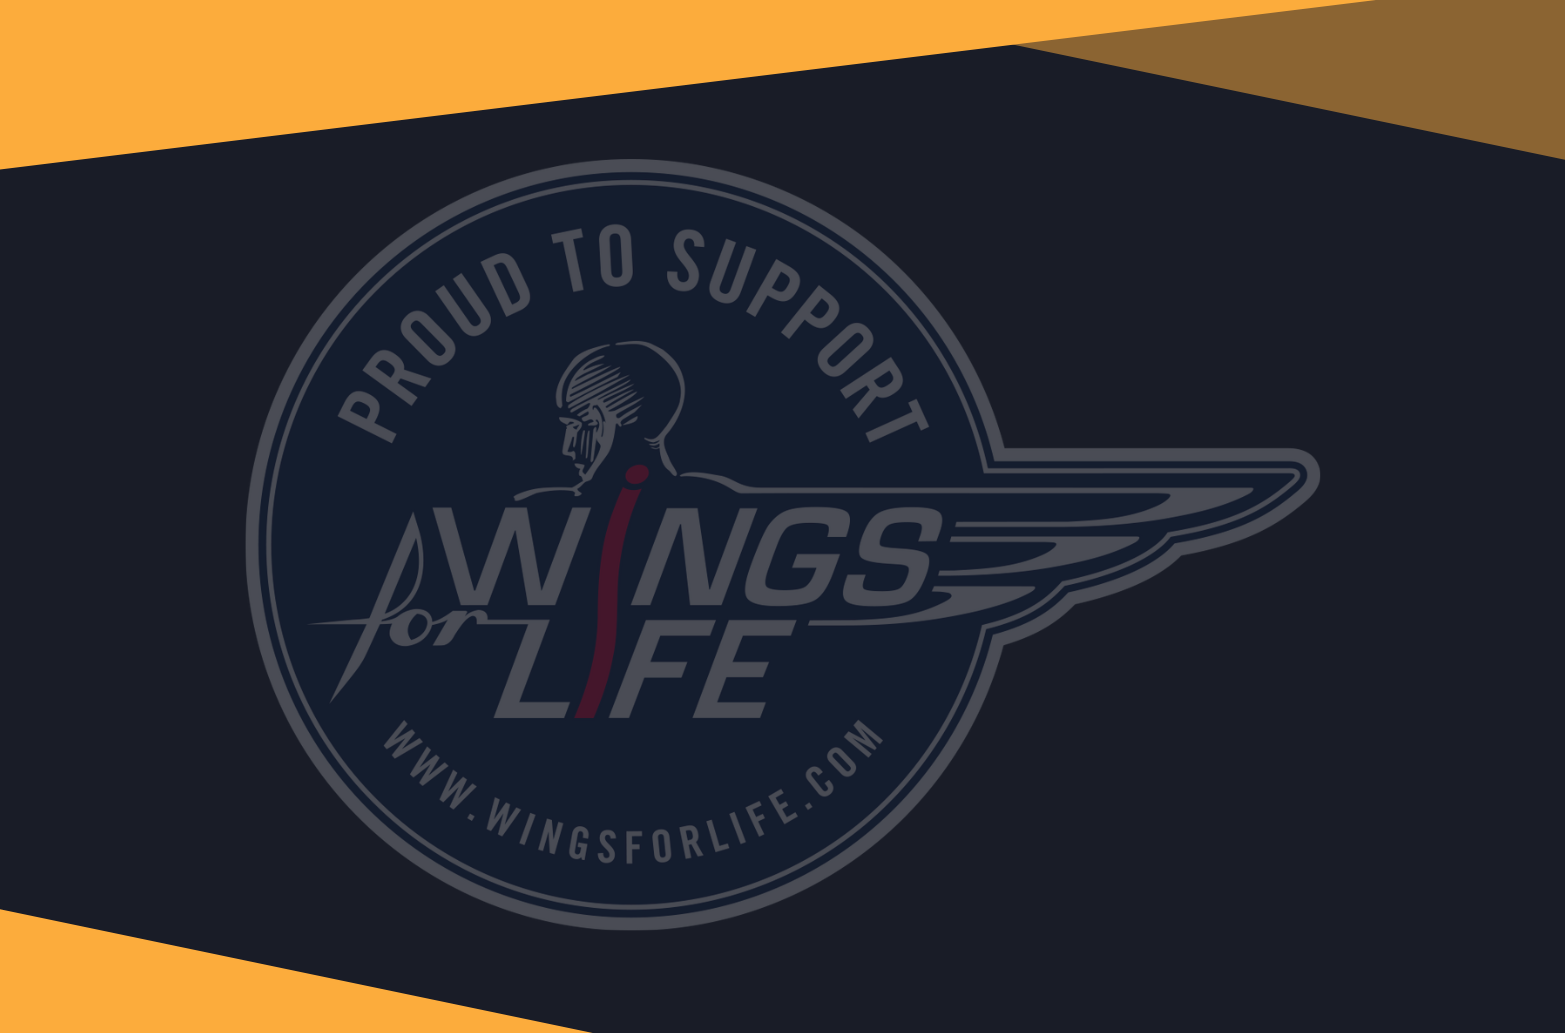 Supporting Wings For Life